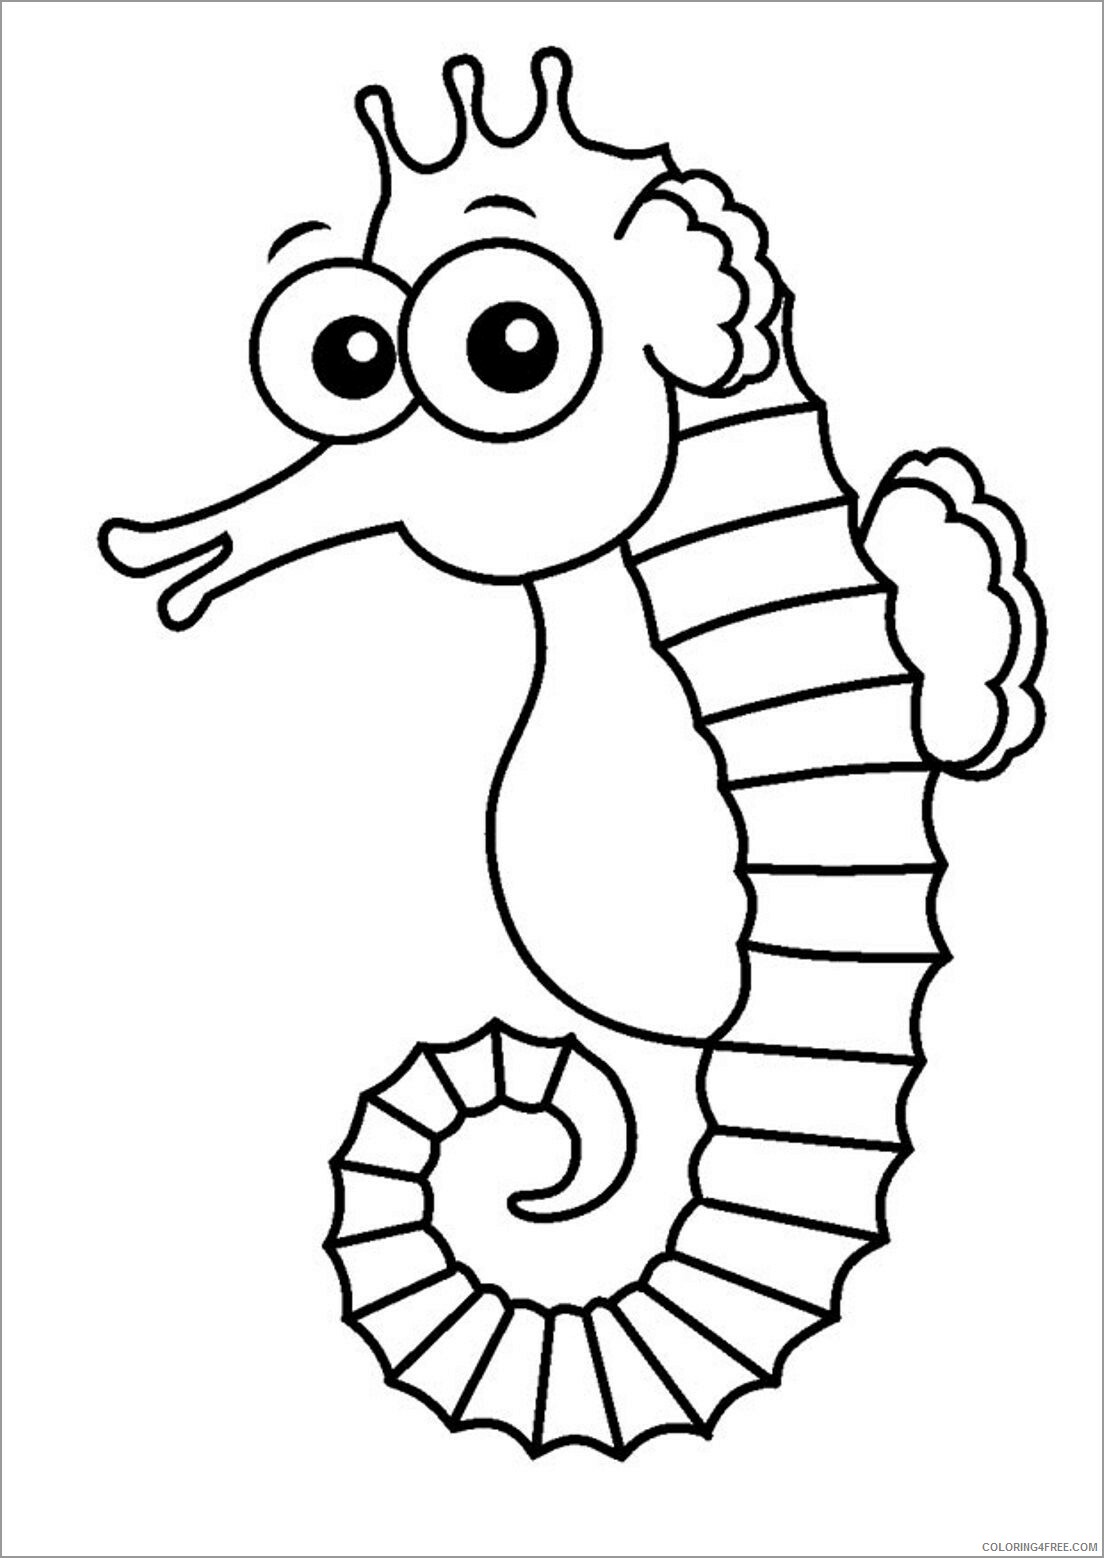 Seahorse Coloring Pages Animal Printable Sheets funny seahorse for kids 2021 4389 Coloring4free